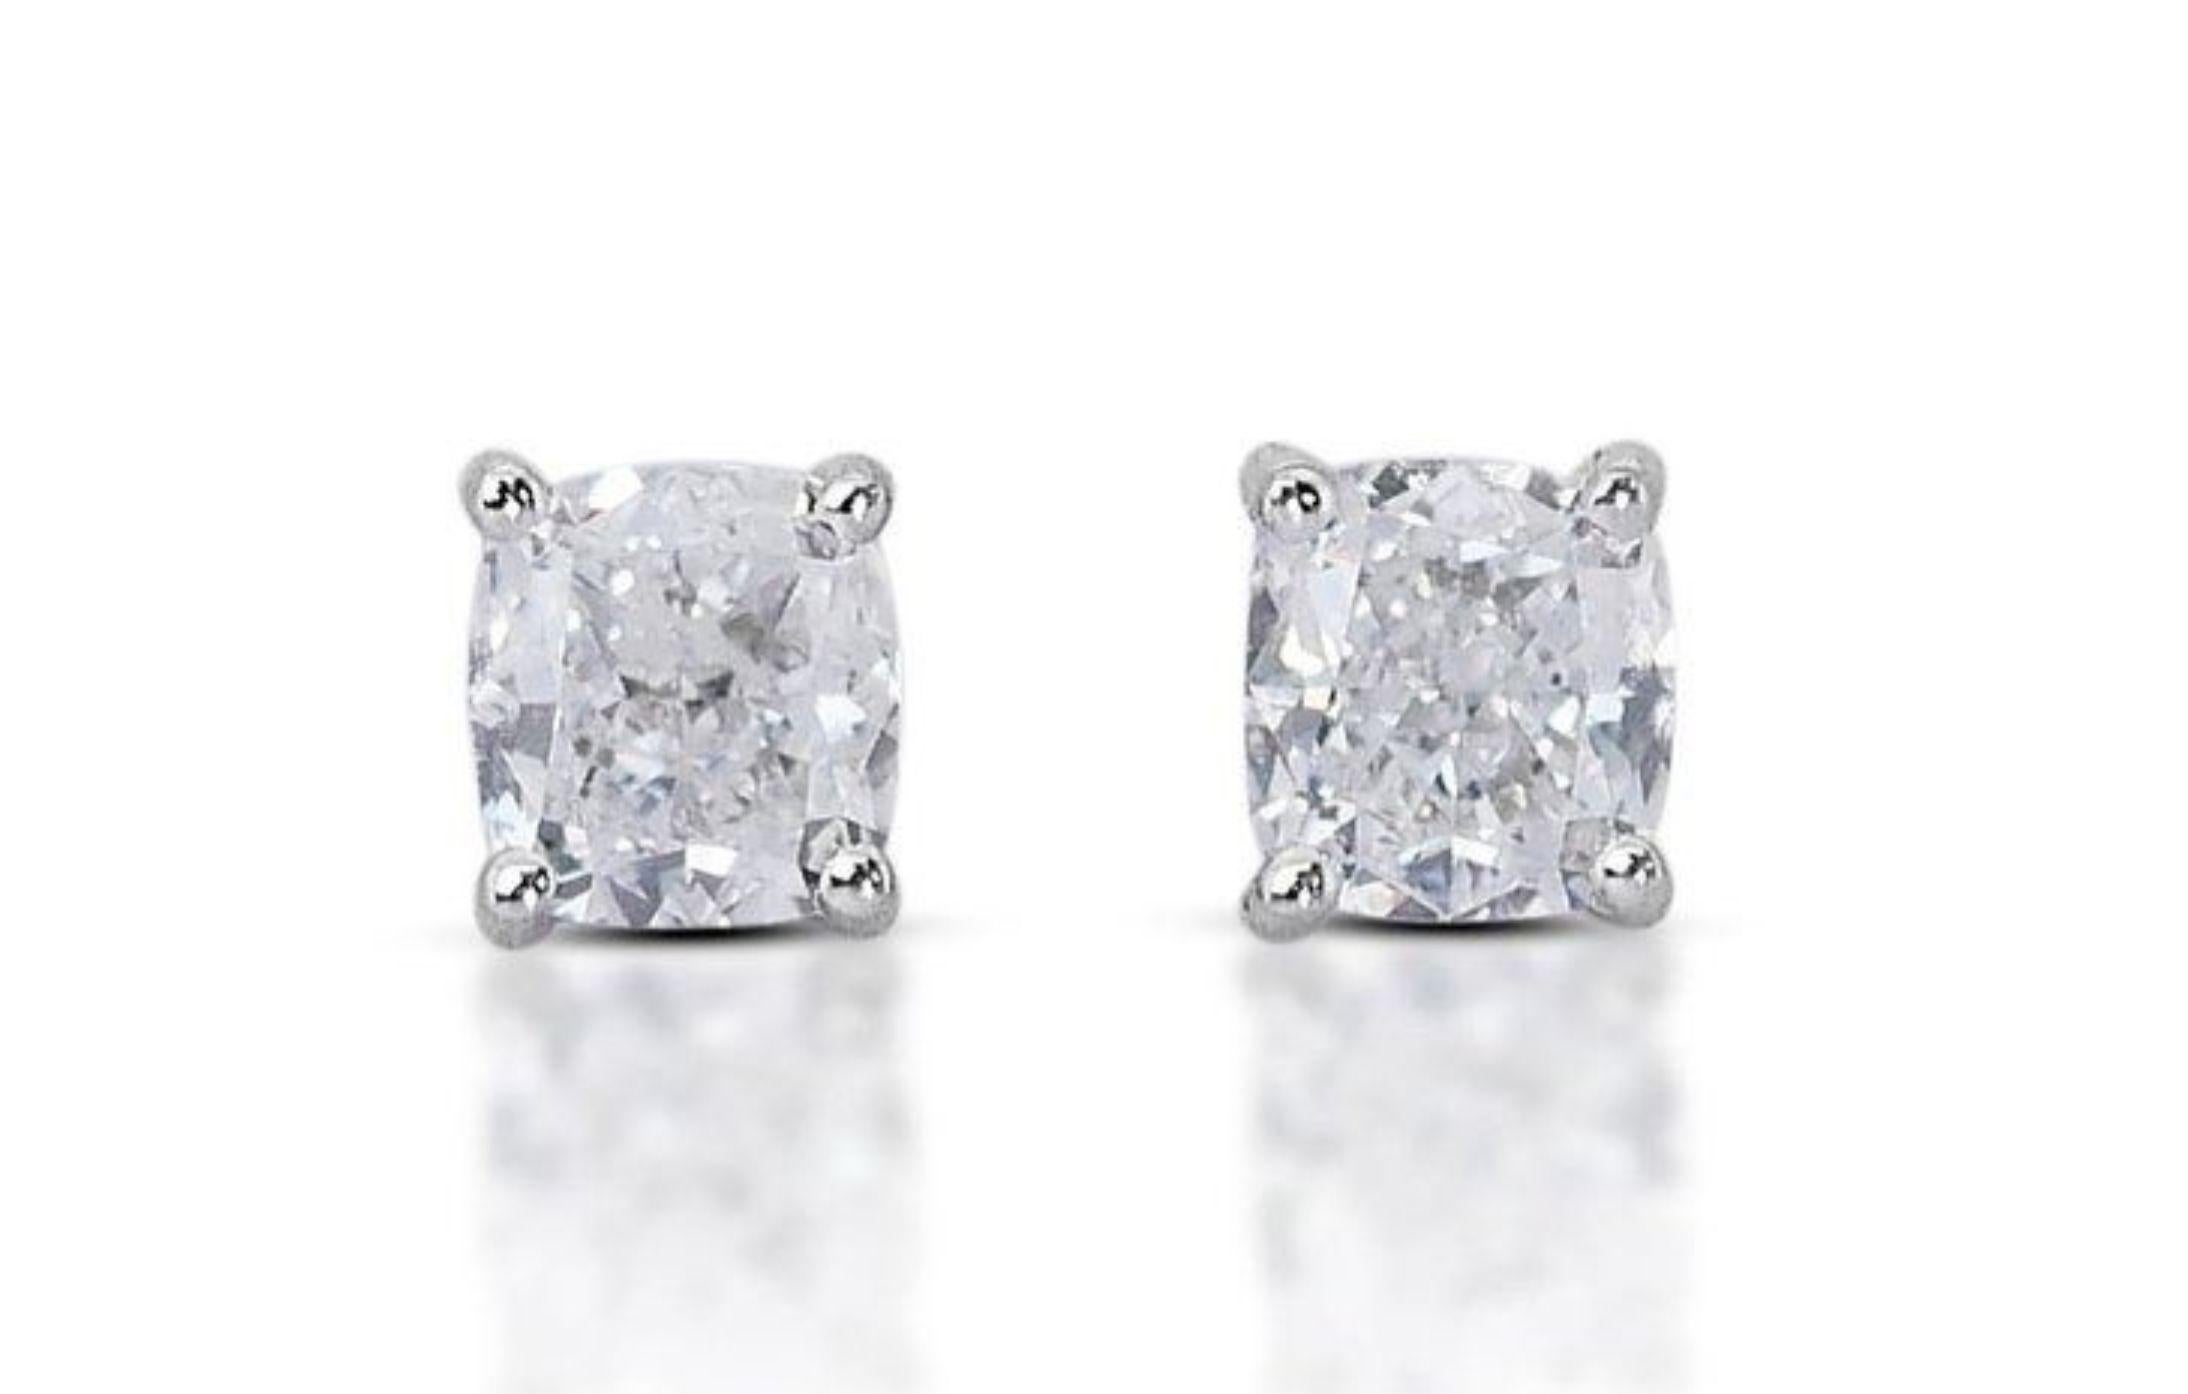 With a total carat weight of 1.4 and a combined weight of 1.83 grams, these earrings offer both elegance and luxury. Each diamond is accompanied by a GIA certificate, ensuring their authenticity and quality. This prestigious certification guarantees